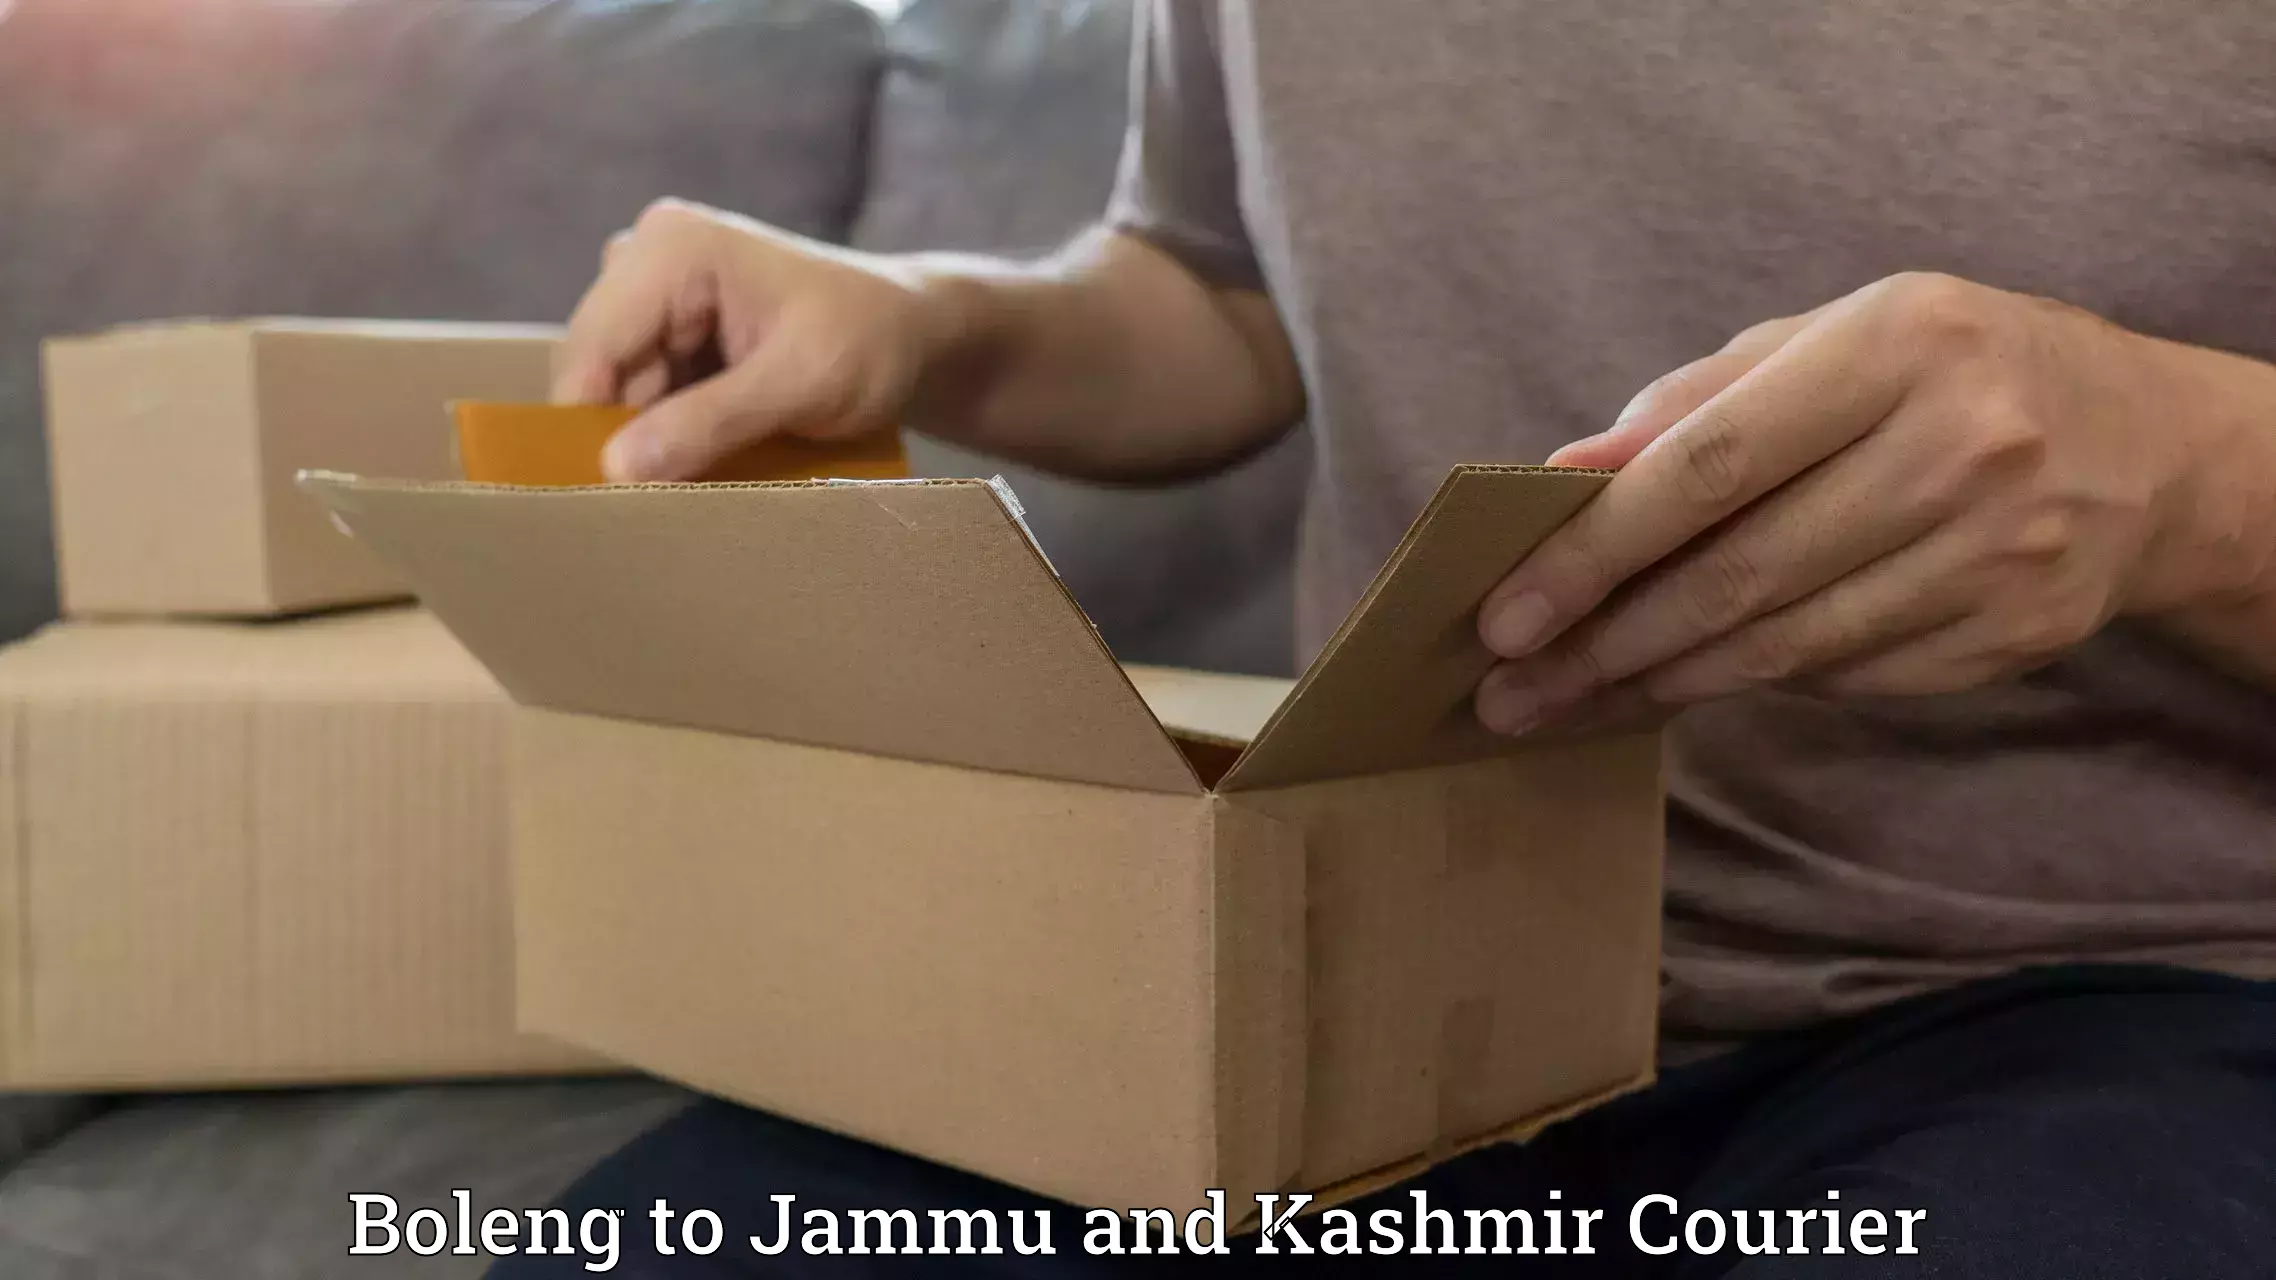 Courier tracking online Boleng to Jammu and Kashmir